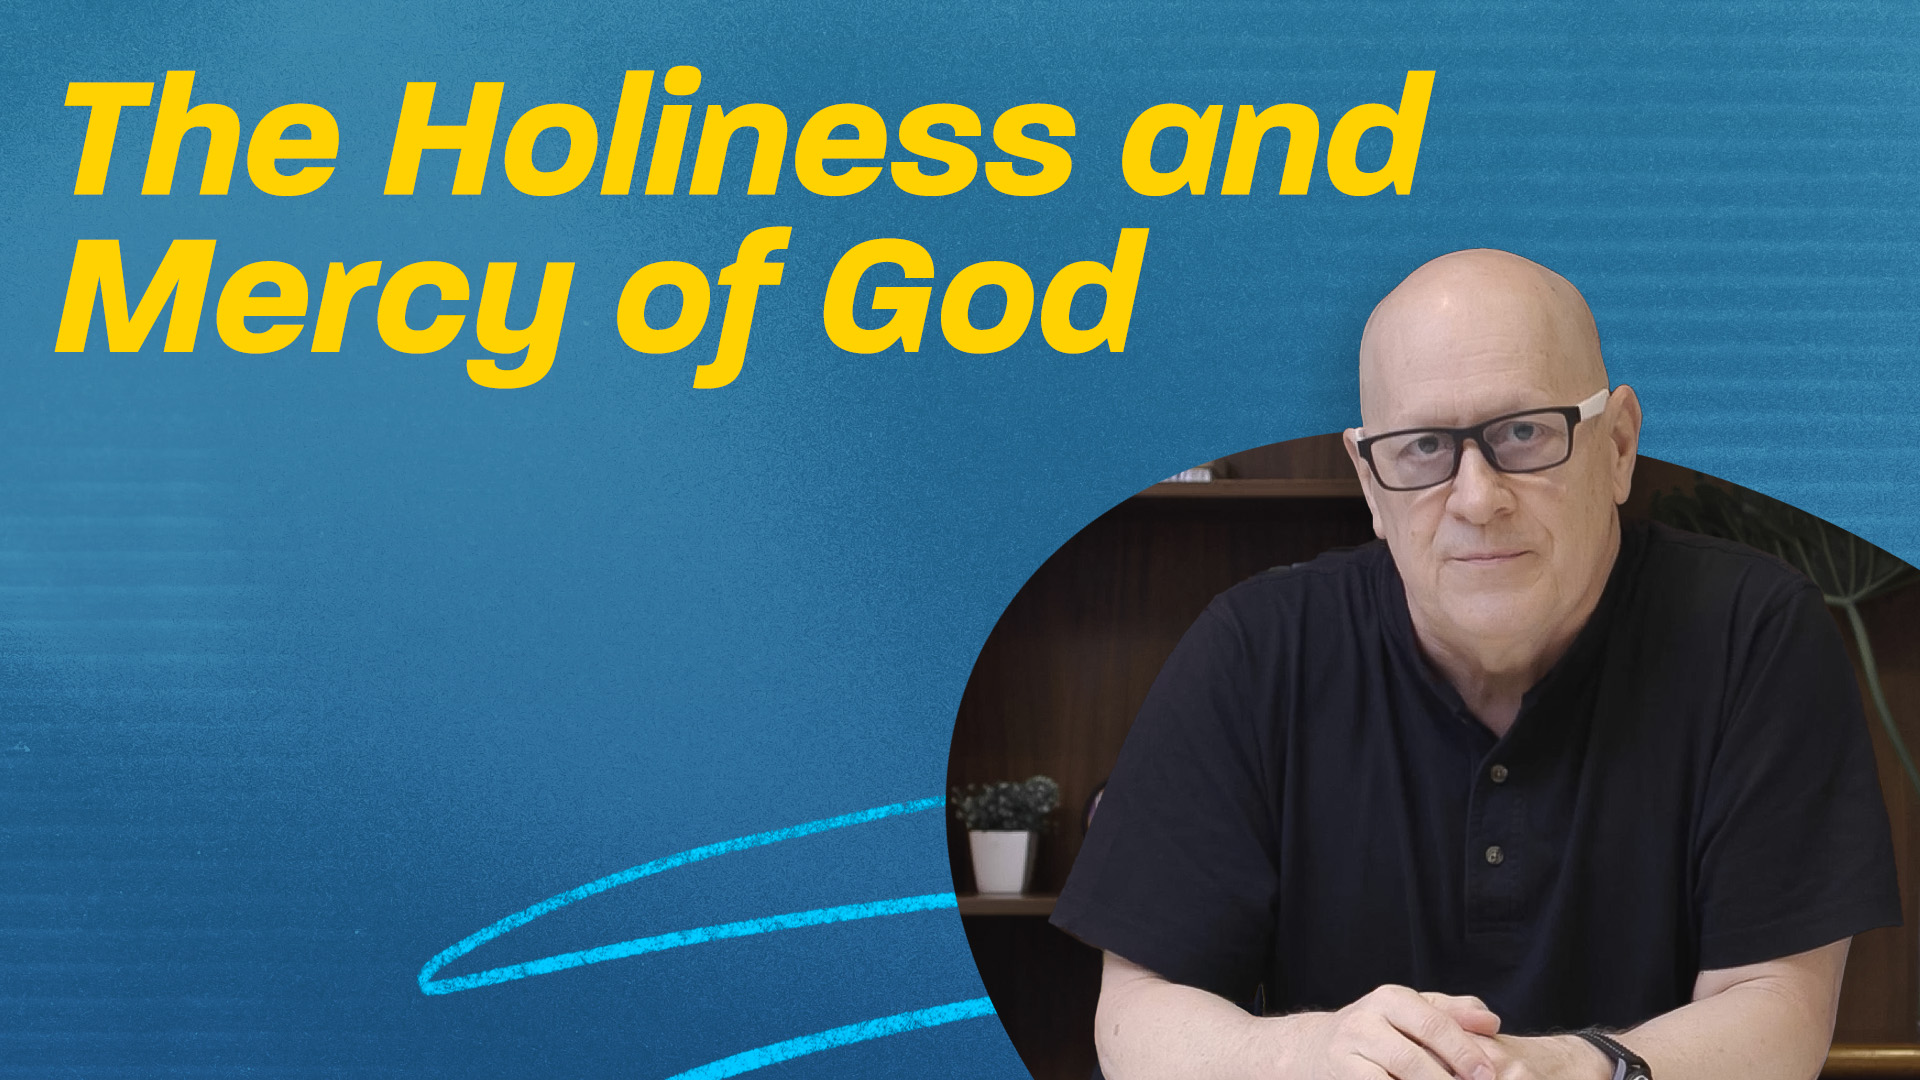 The Holiness and Mercy of God